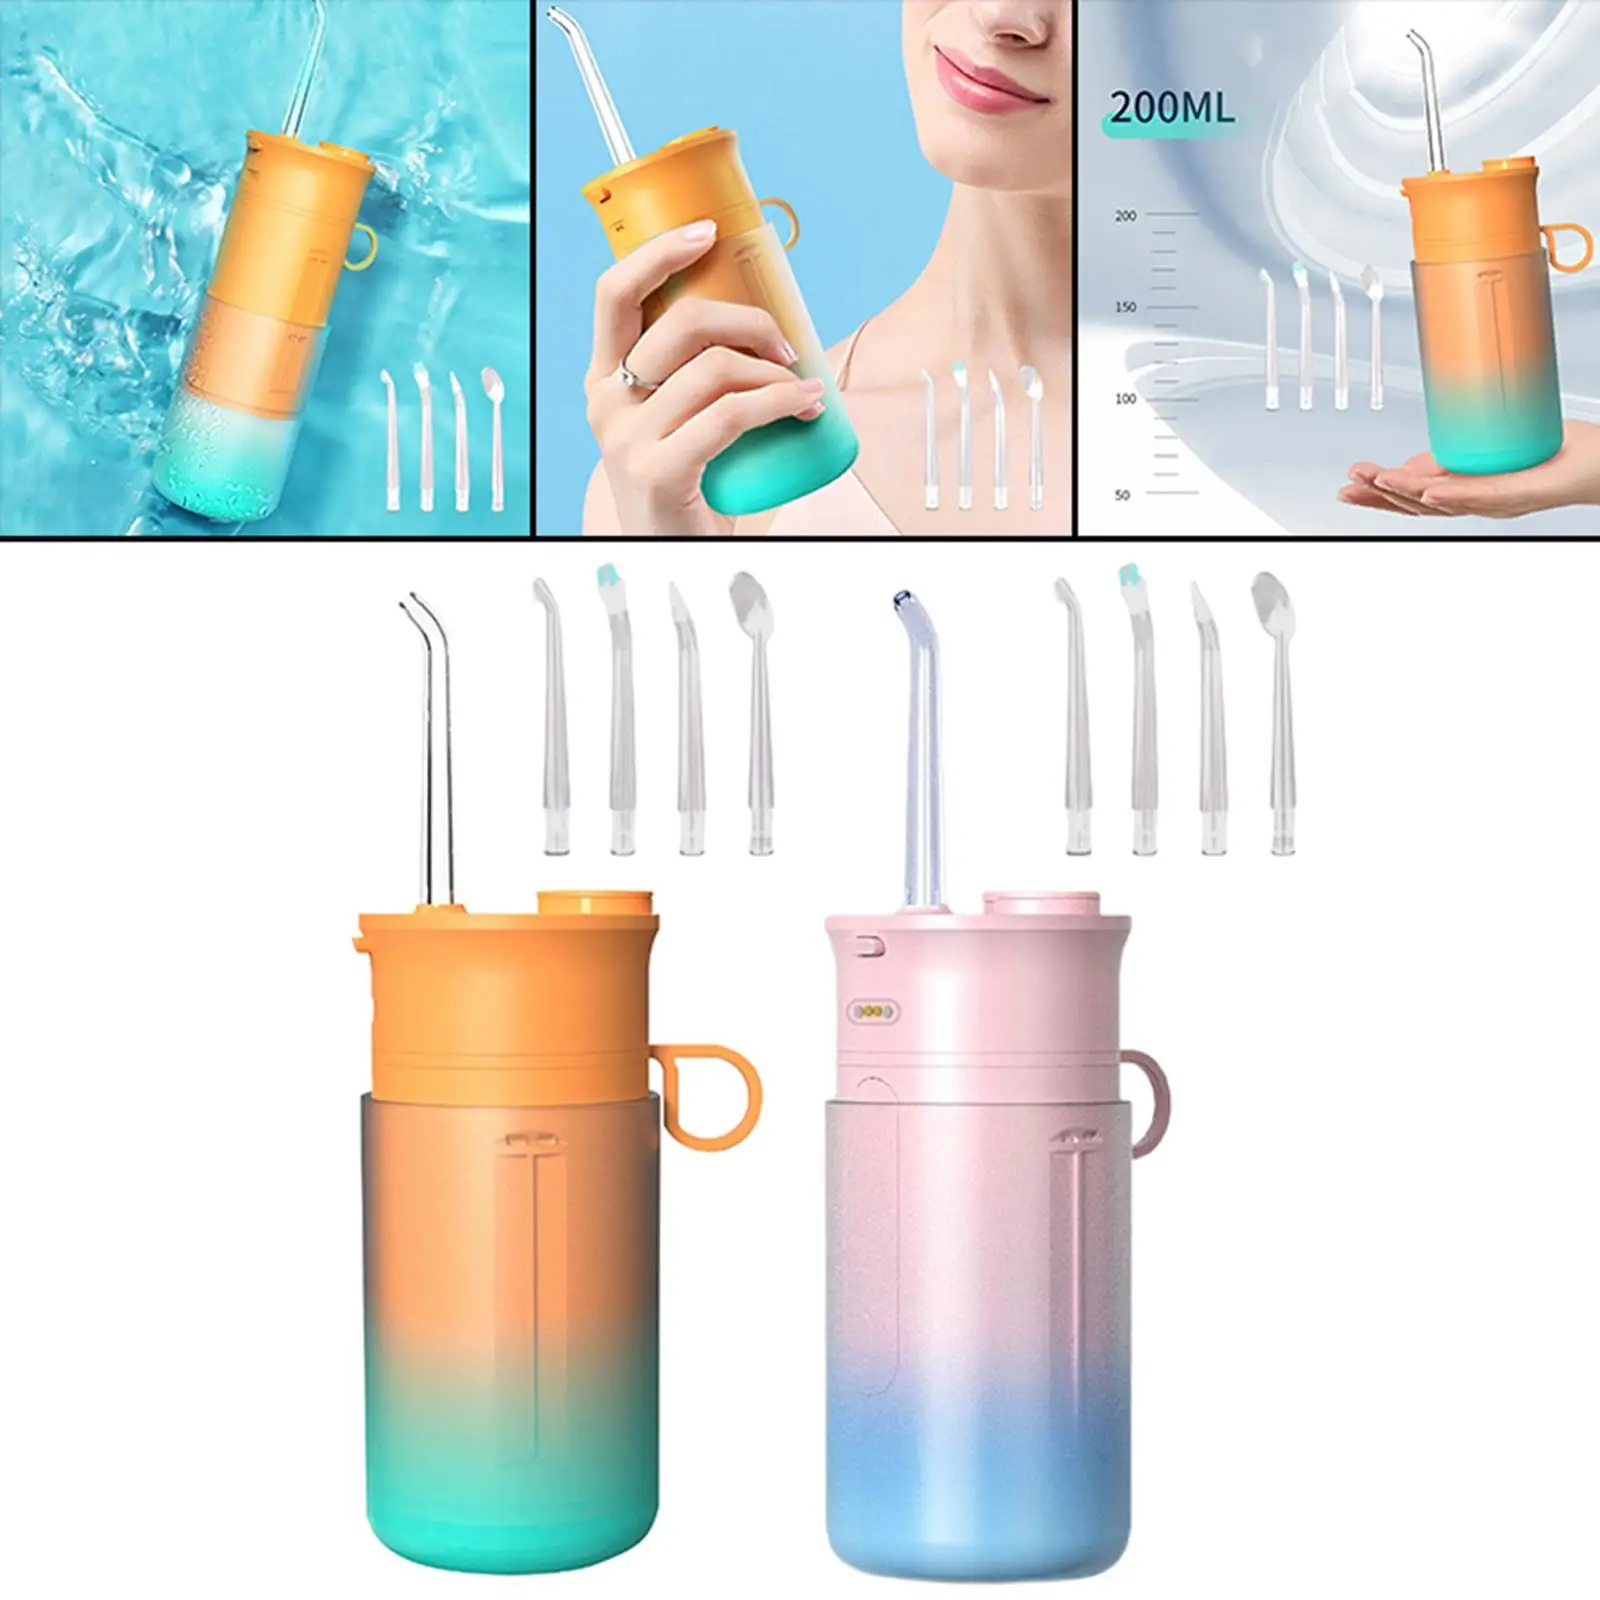 Cordless Oral Irrigator Electric Flosser Portable with 3 Modes 200ml IPX7 Waterproof Professional Telescopic for Home Use